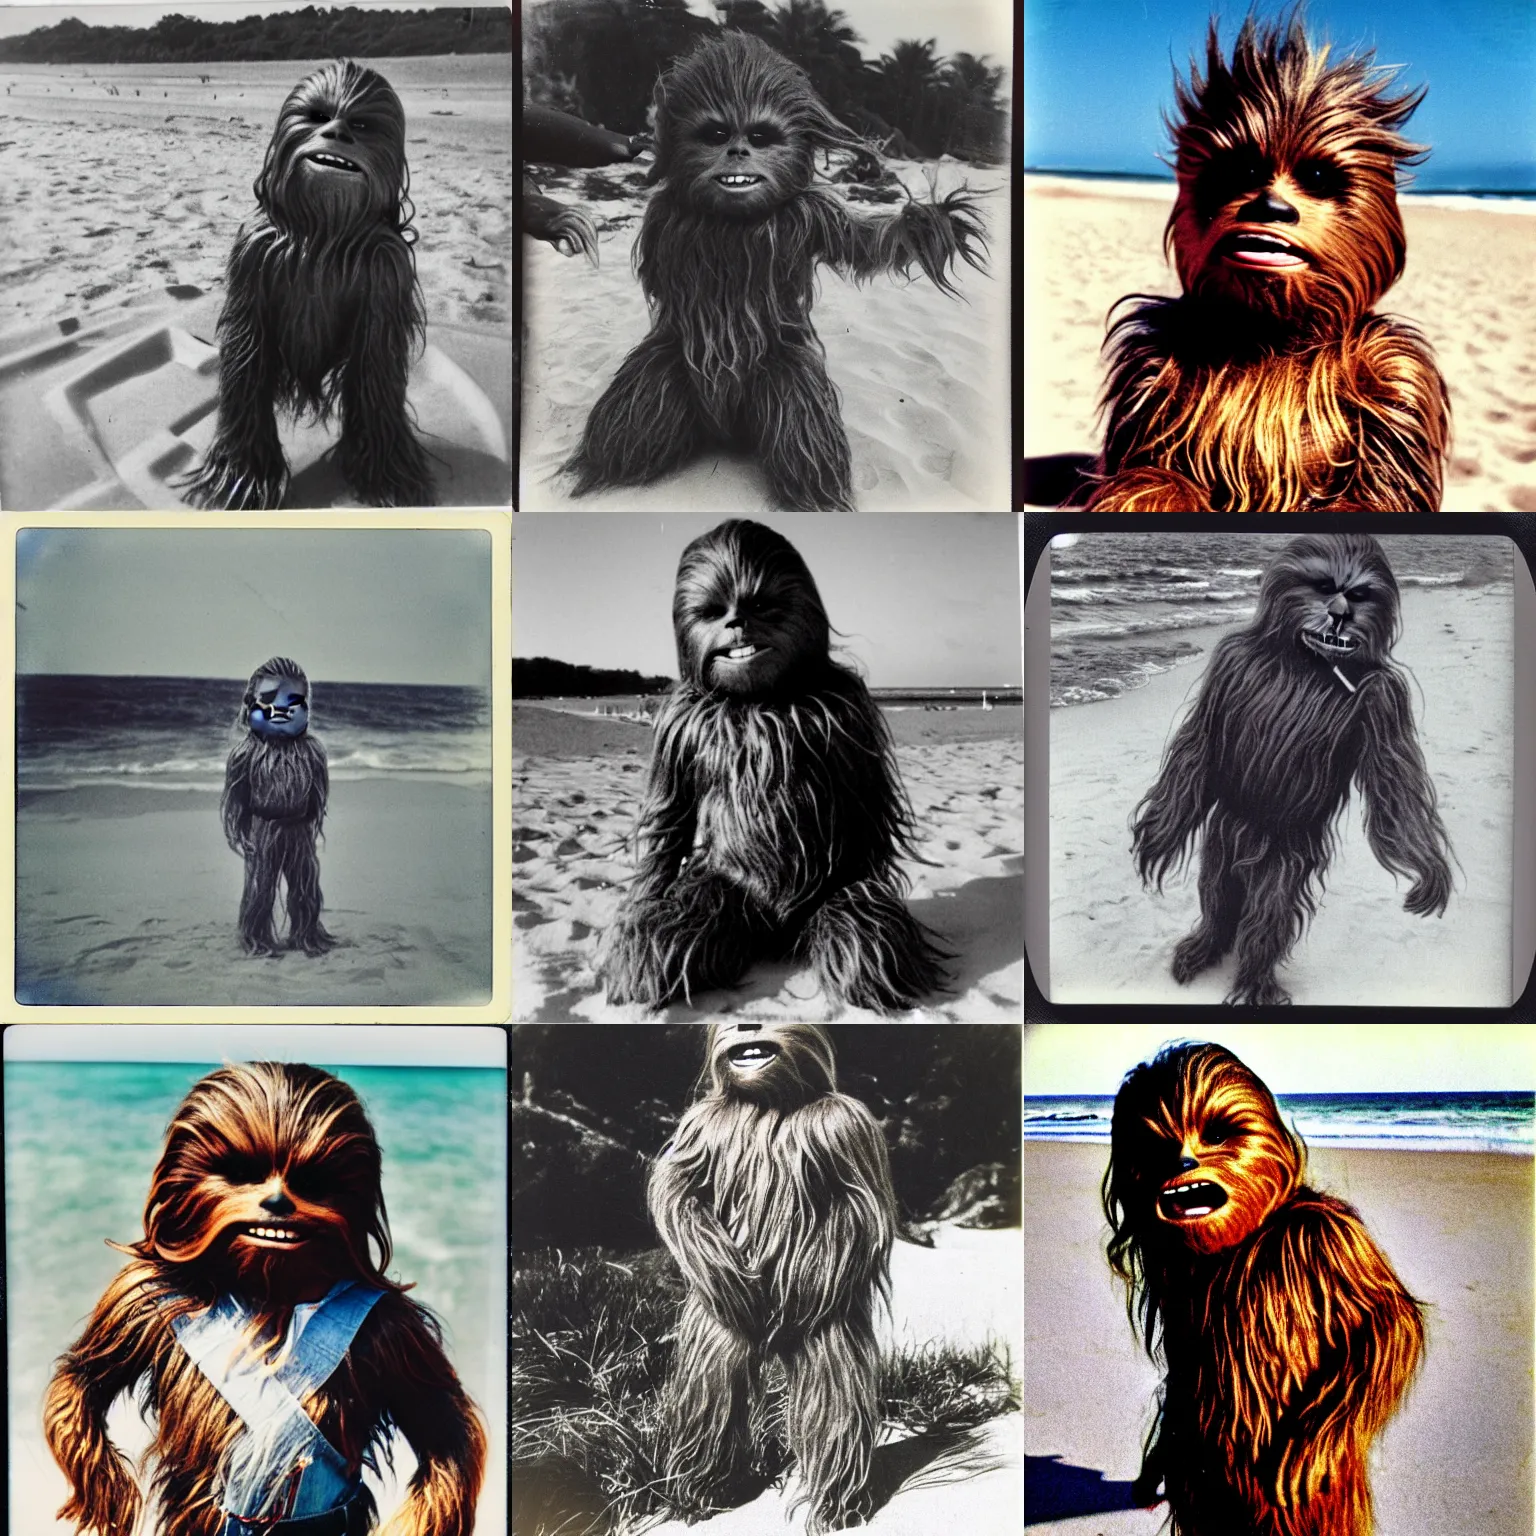 Prompt: polaroid of chewbacca as a kid at the beach, smiling candid photo